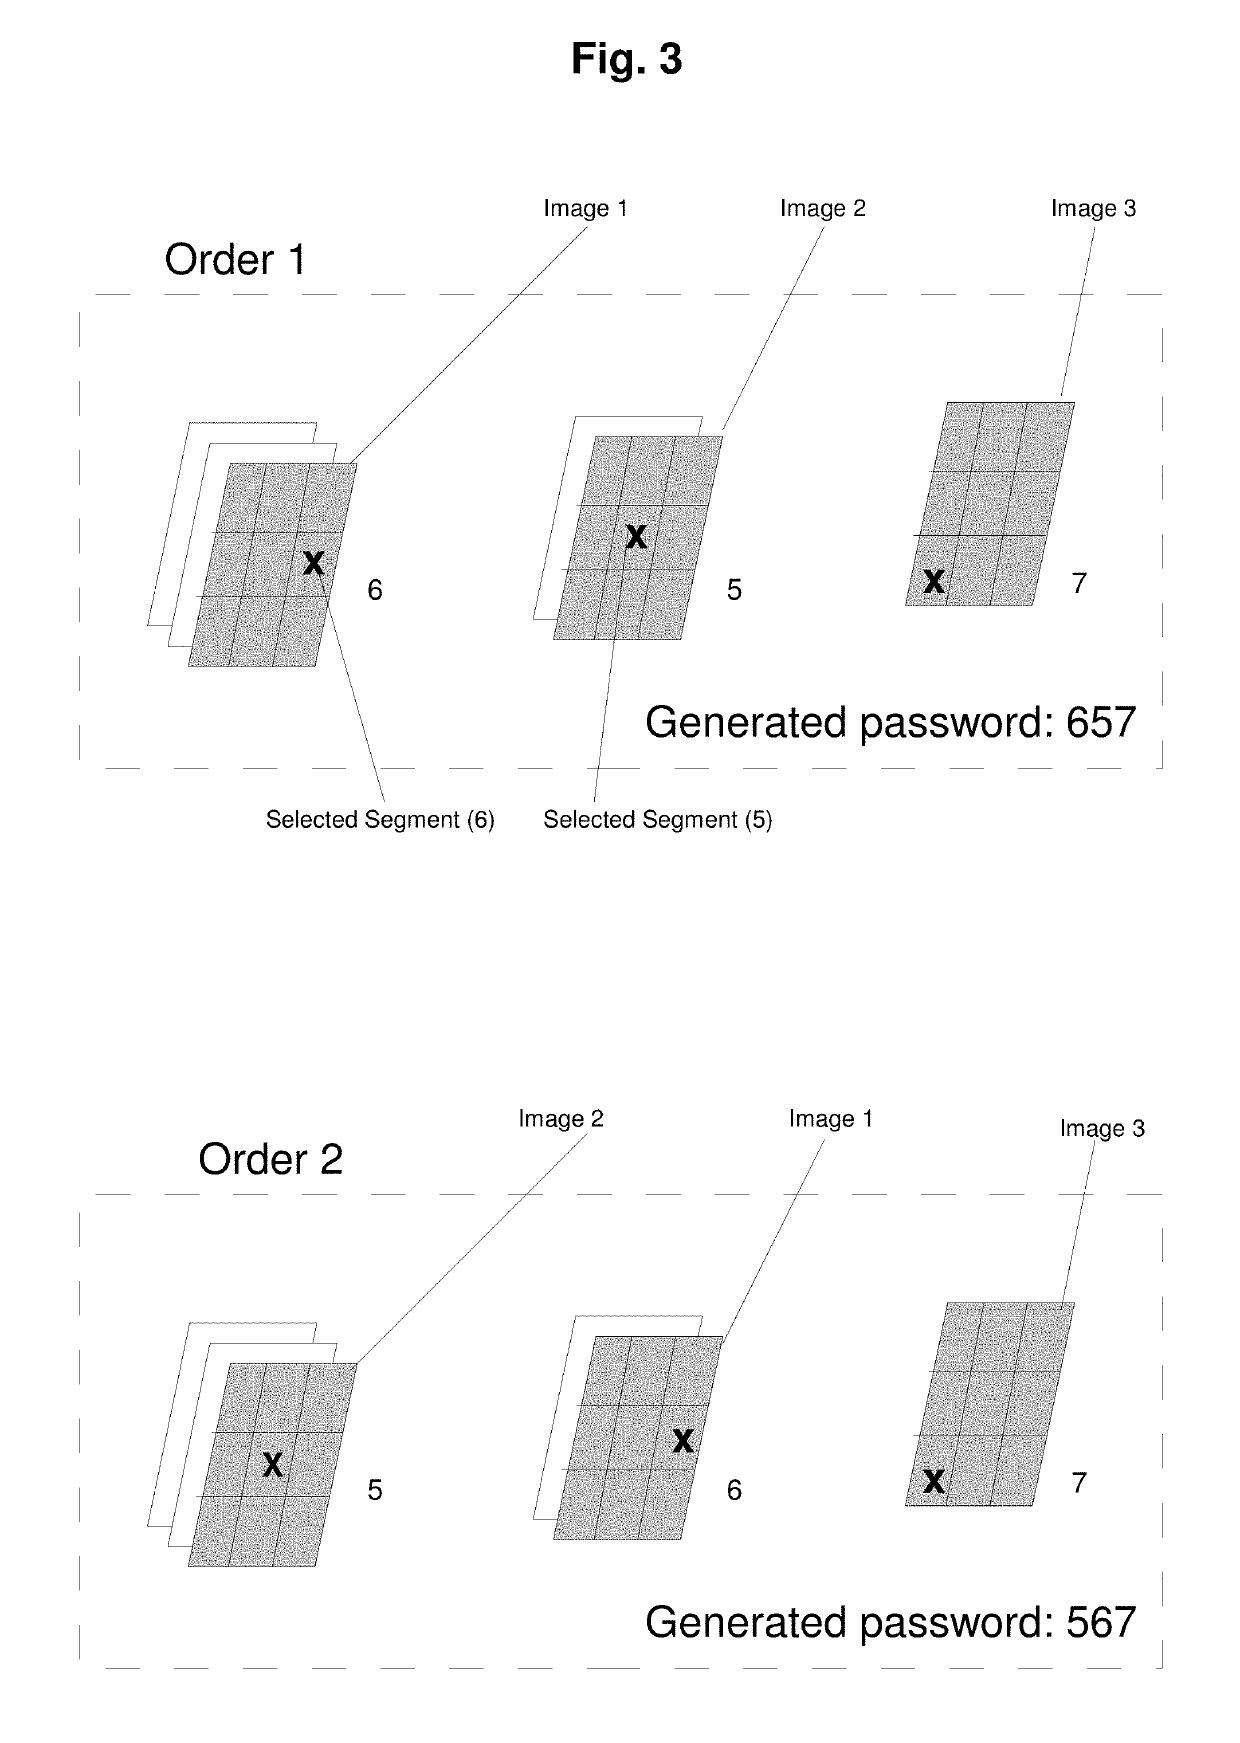 Authentication based on visual memory